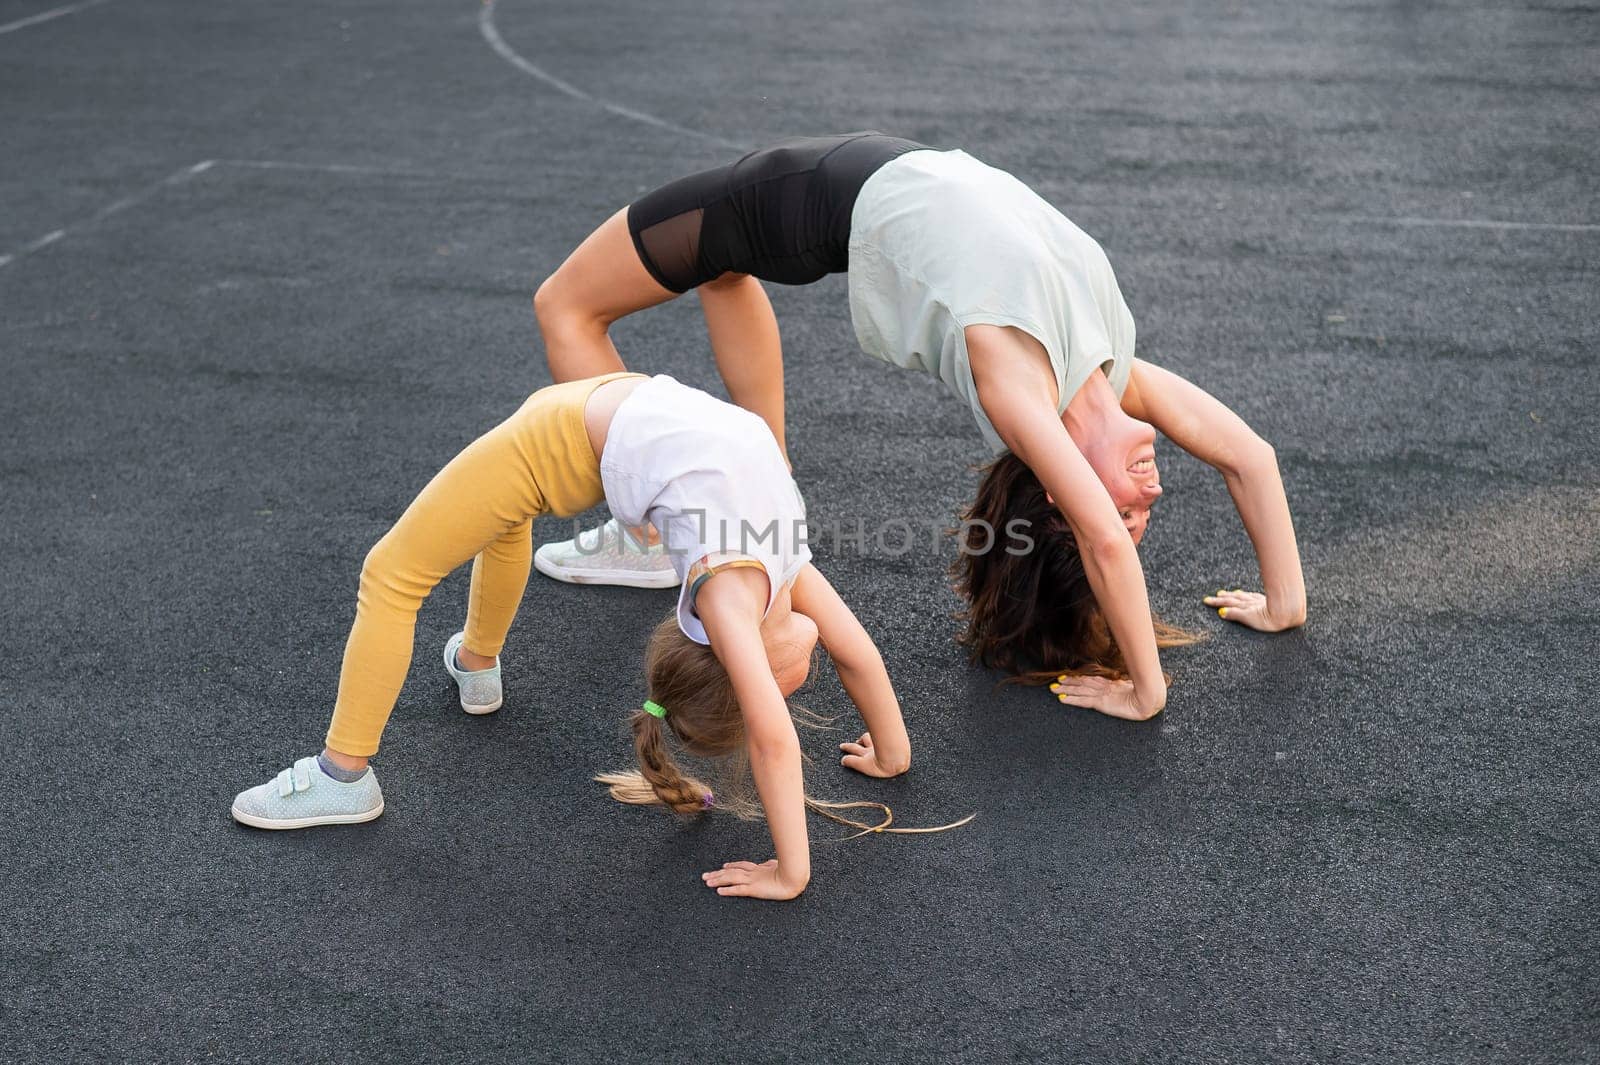 A little girl and her mom do a bridge exercise at the outdoor sports ground